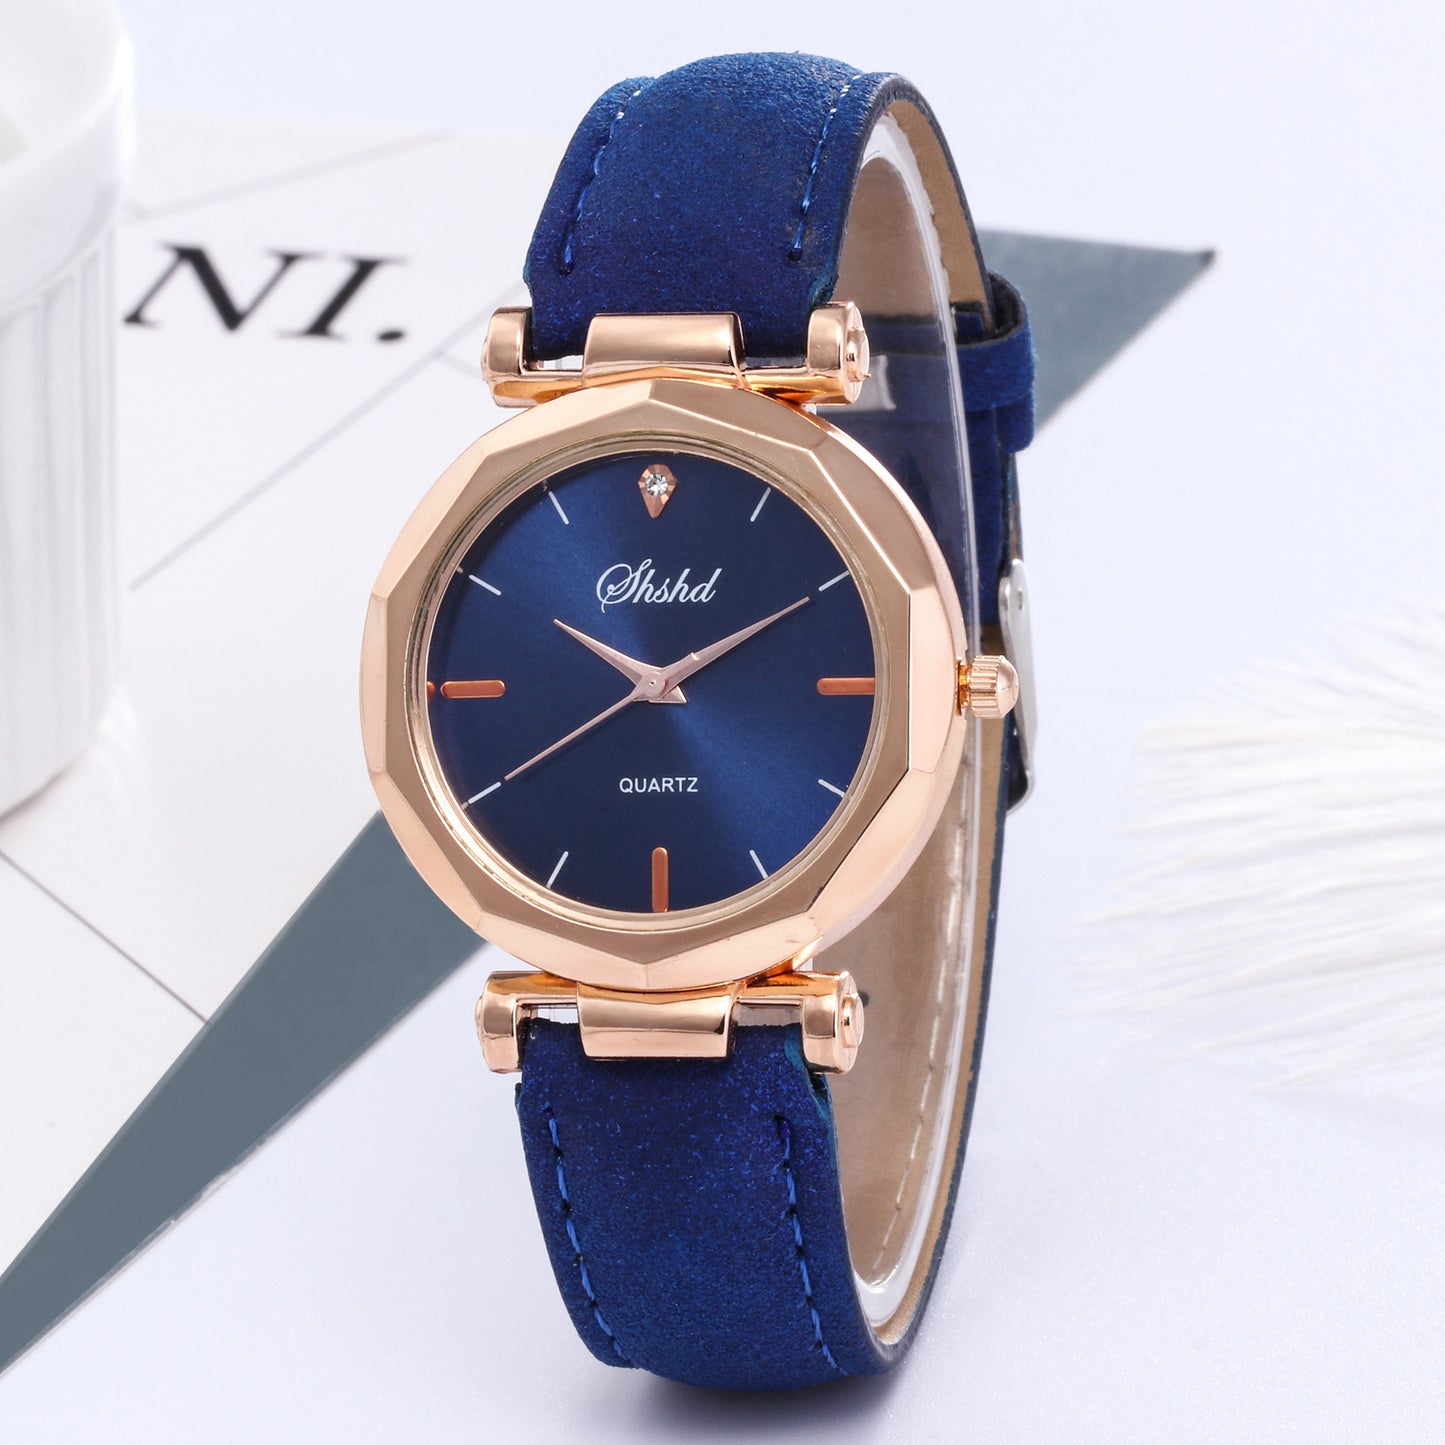 New ladies casual watches